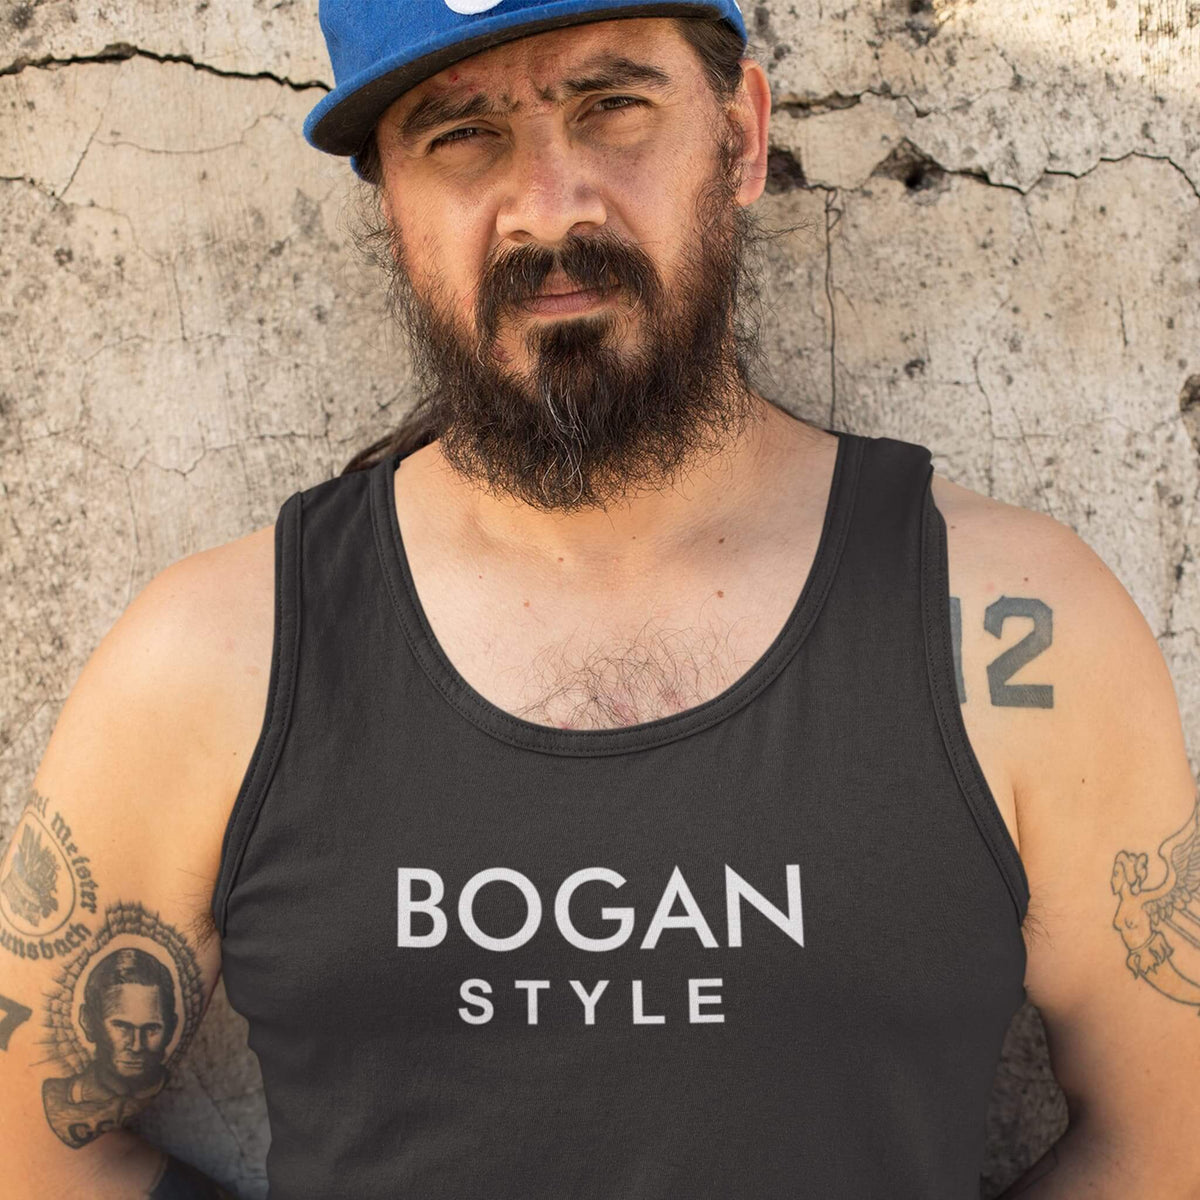 Bearded guy wears black singlet with Bogan Style printed on front.